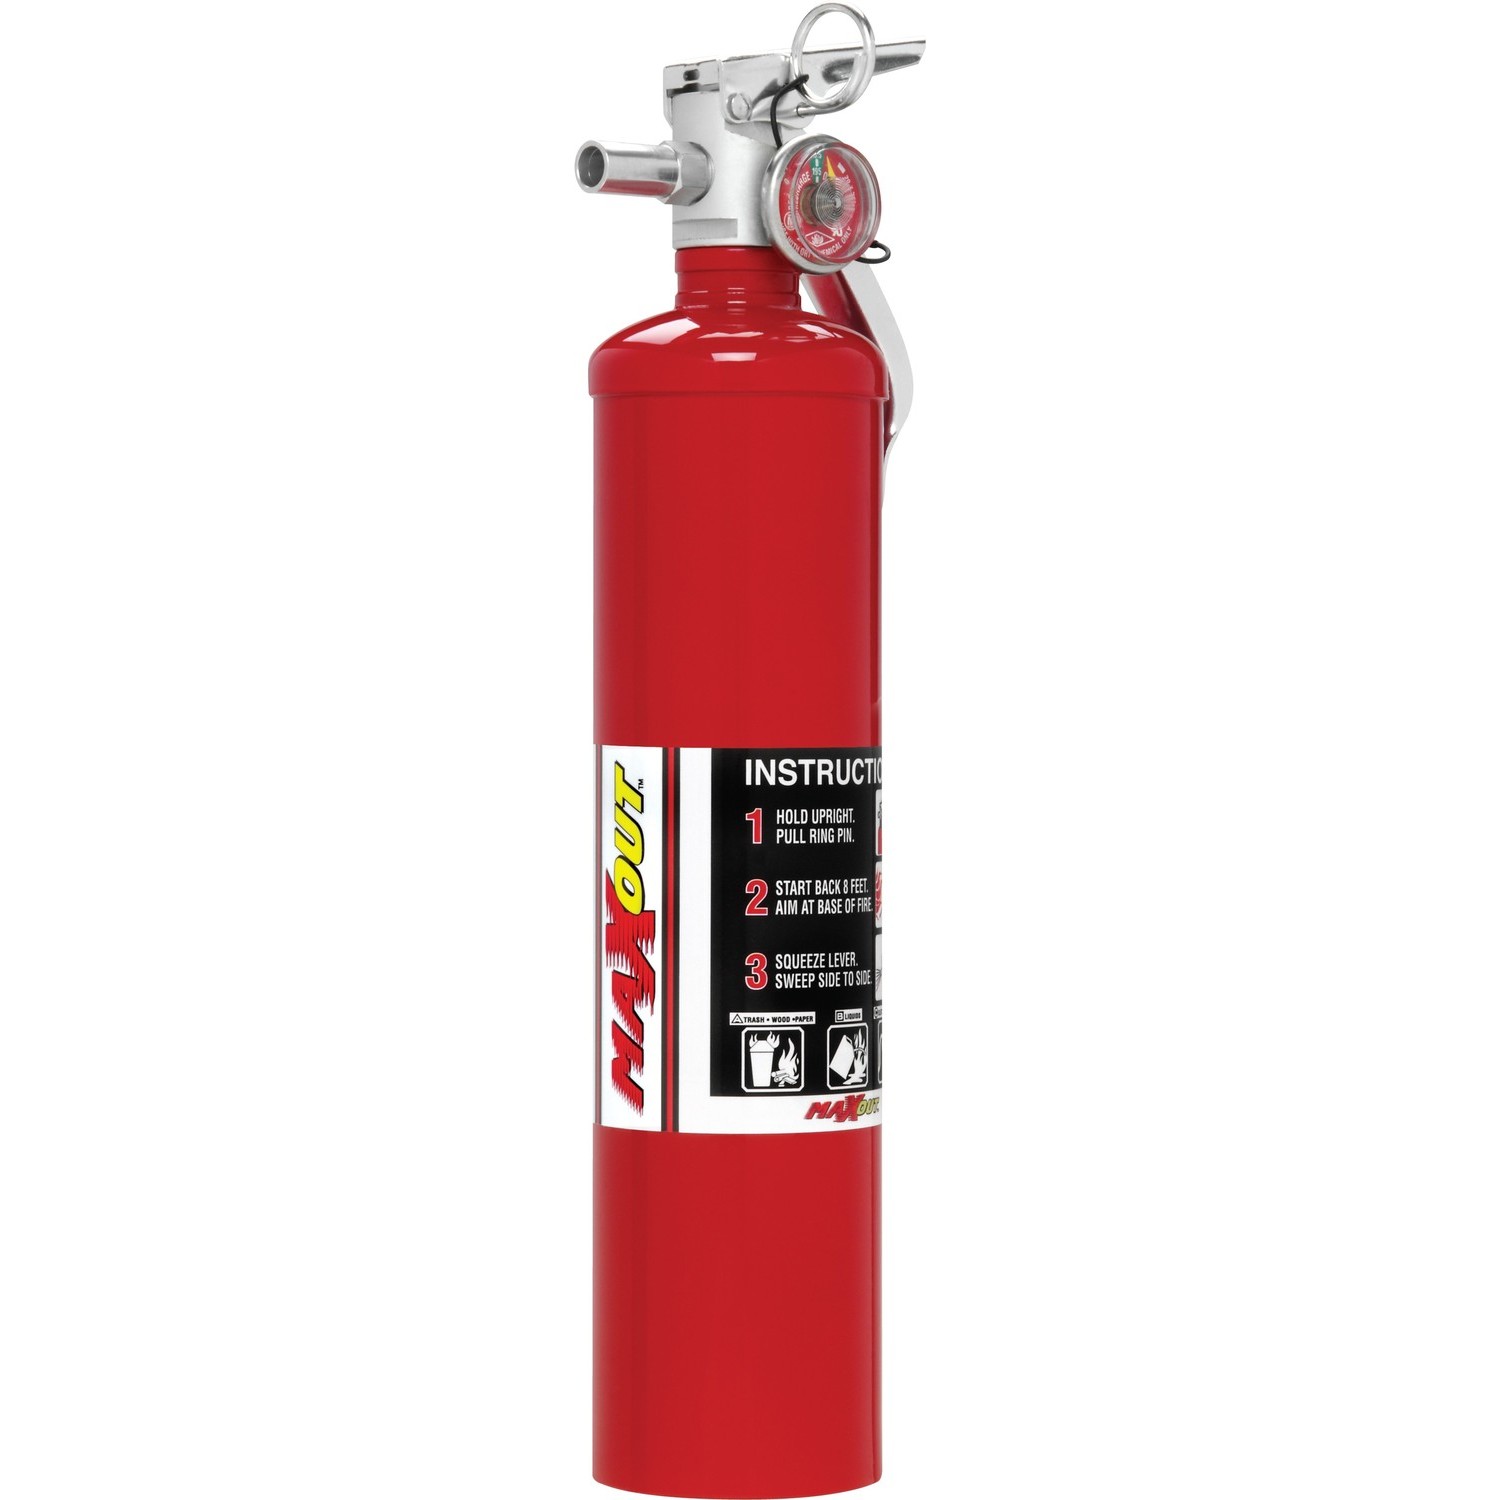 2.5 lb. MaxOut Red Dry Chemical Fire Extinguisher